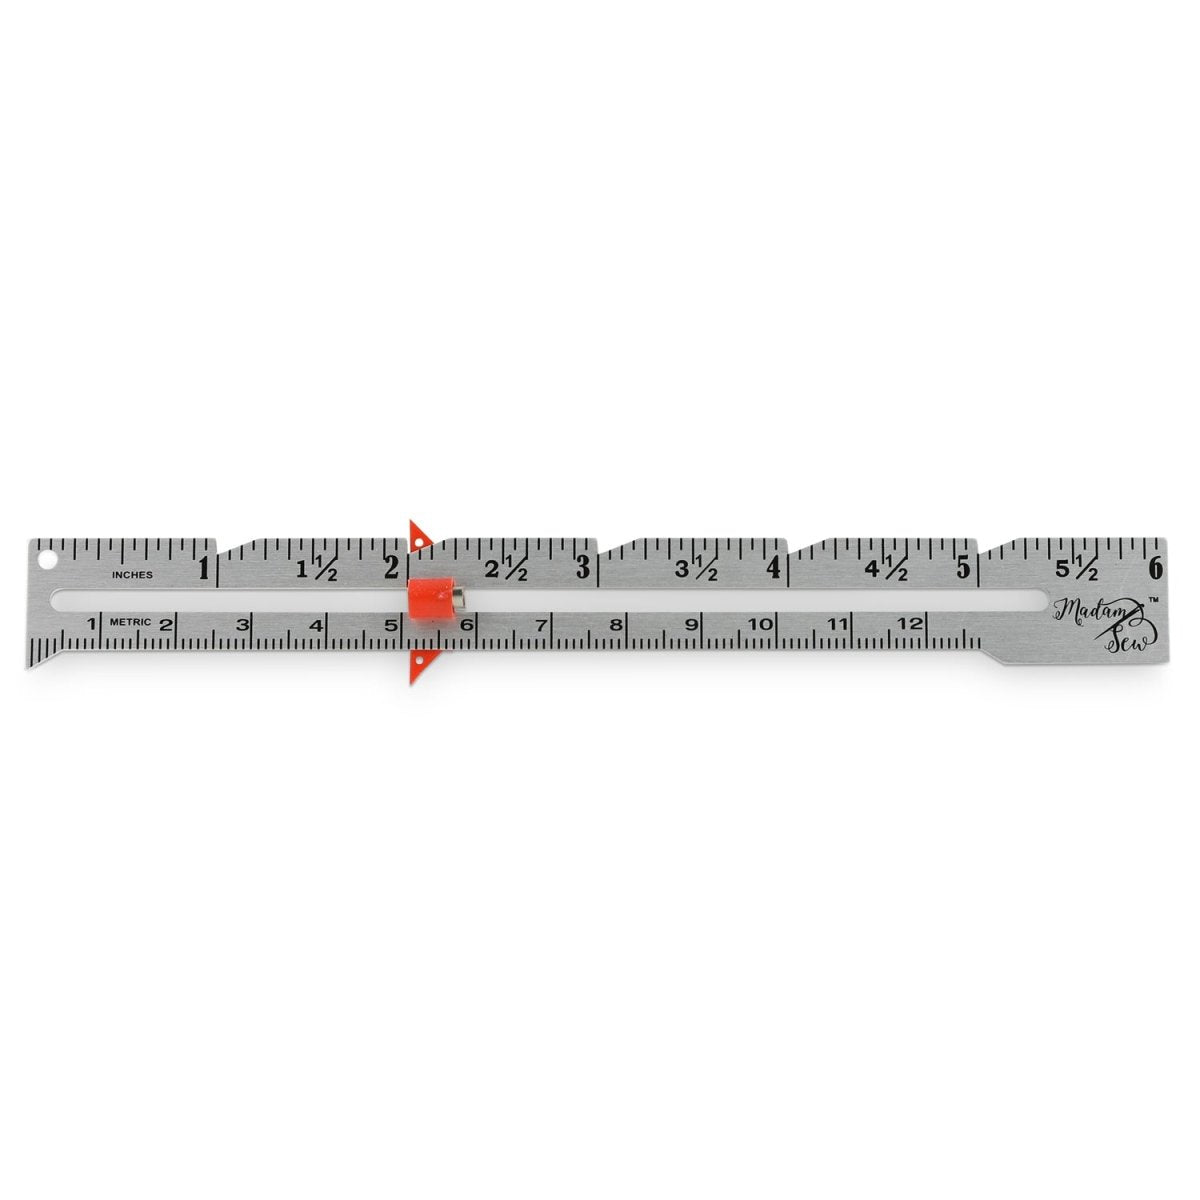 Alloy Sliding Gauge Sewing Measuring Tool Hand DIY Sewing Seam Gauge Ruler  Sewing Measuring Tool Accessory Knitting Crafting